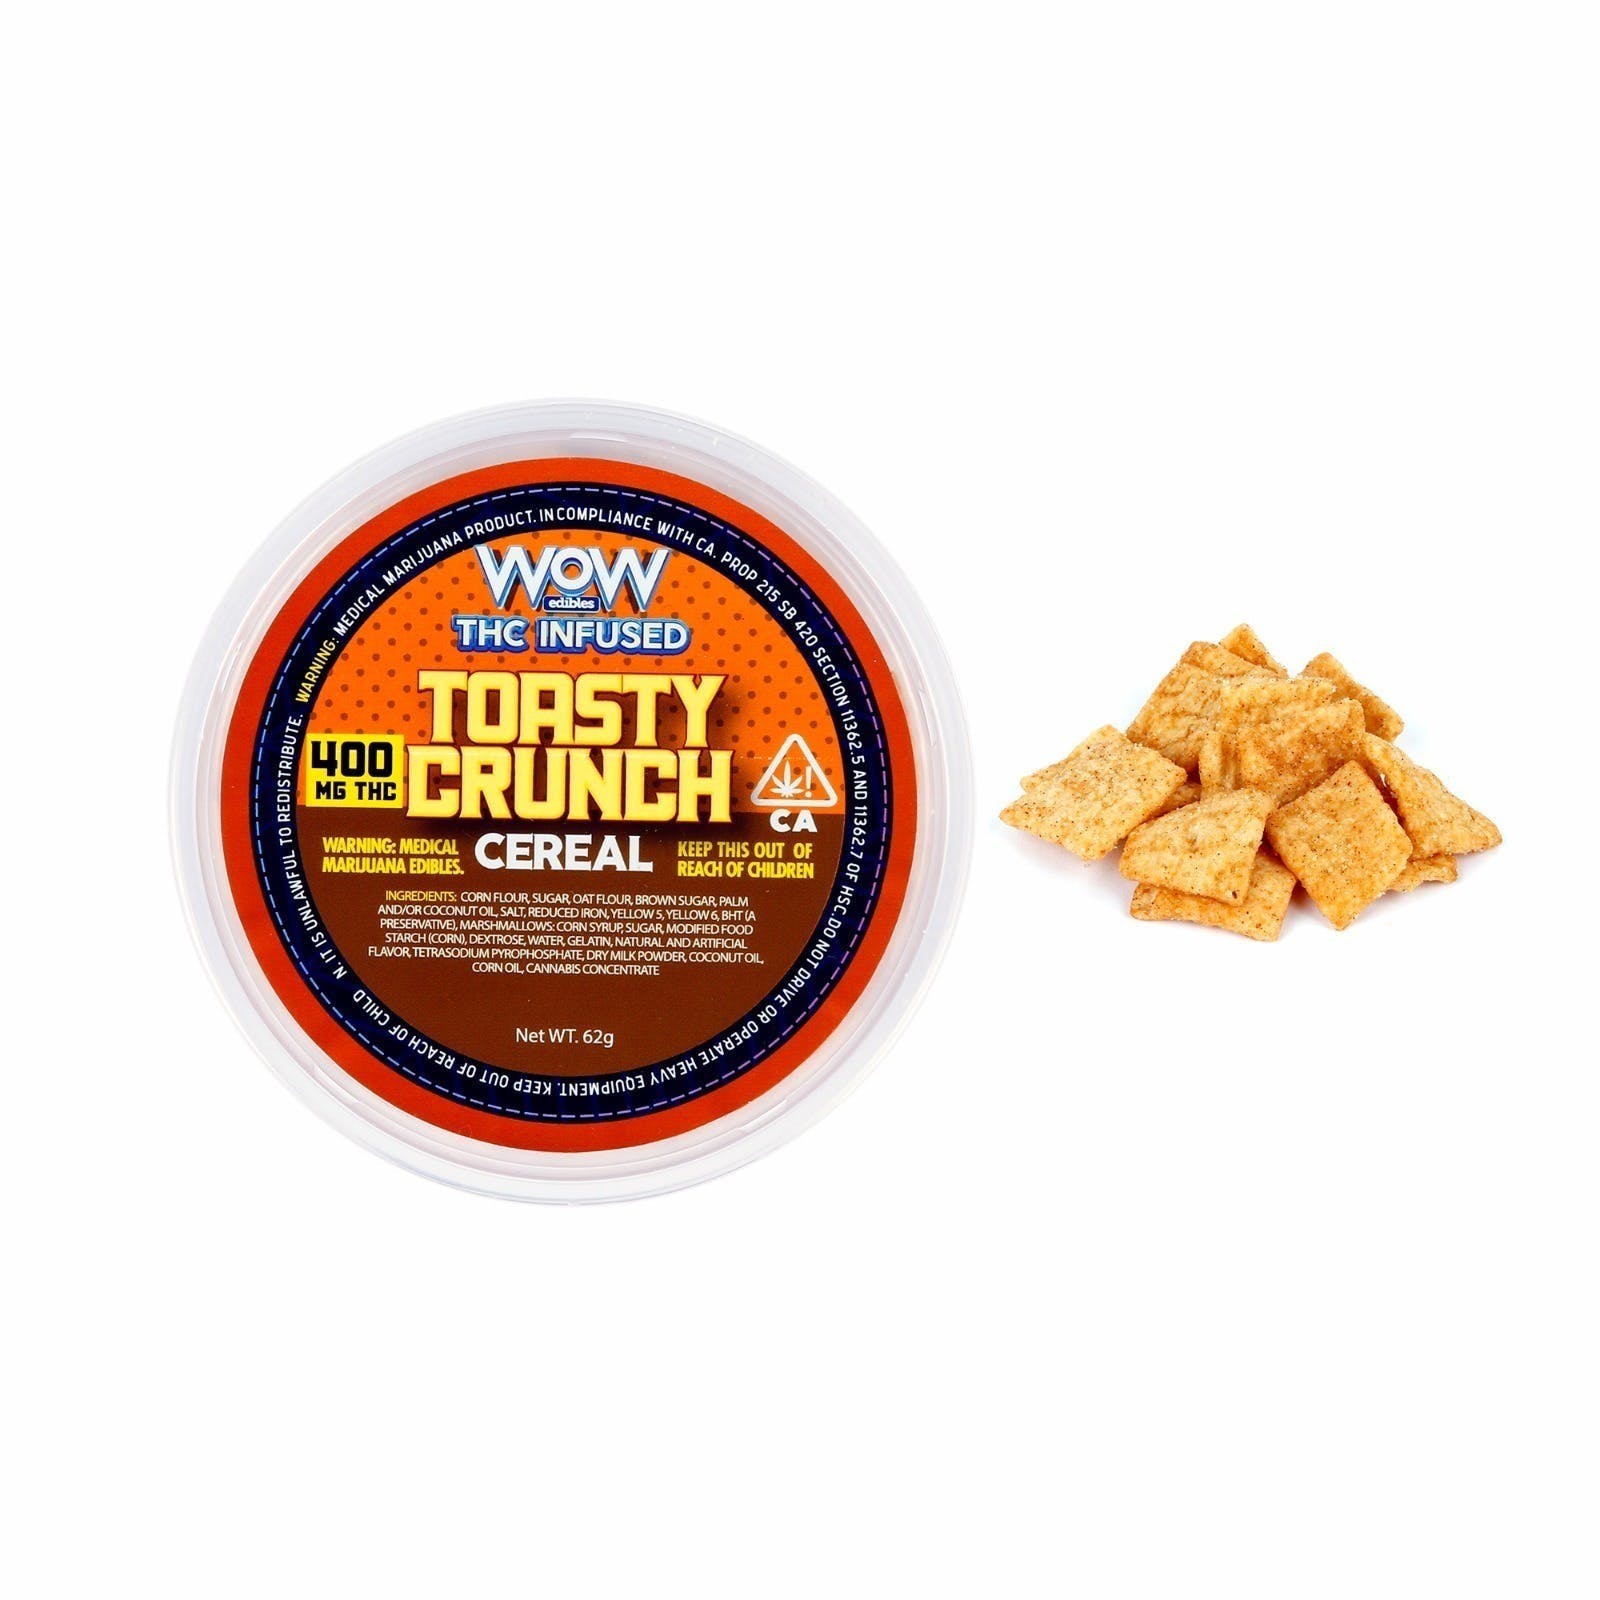 edible-wow-cereal-bowl-toasty-crunchies-400-mg